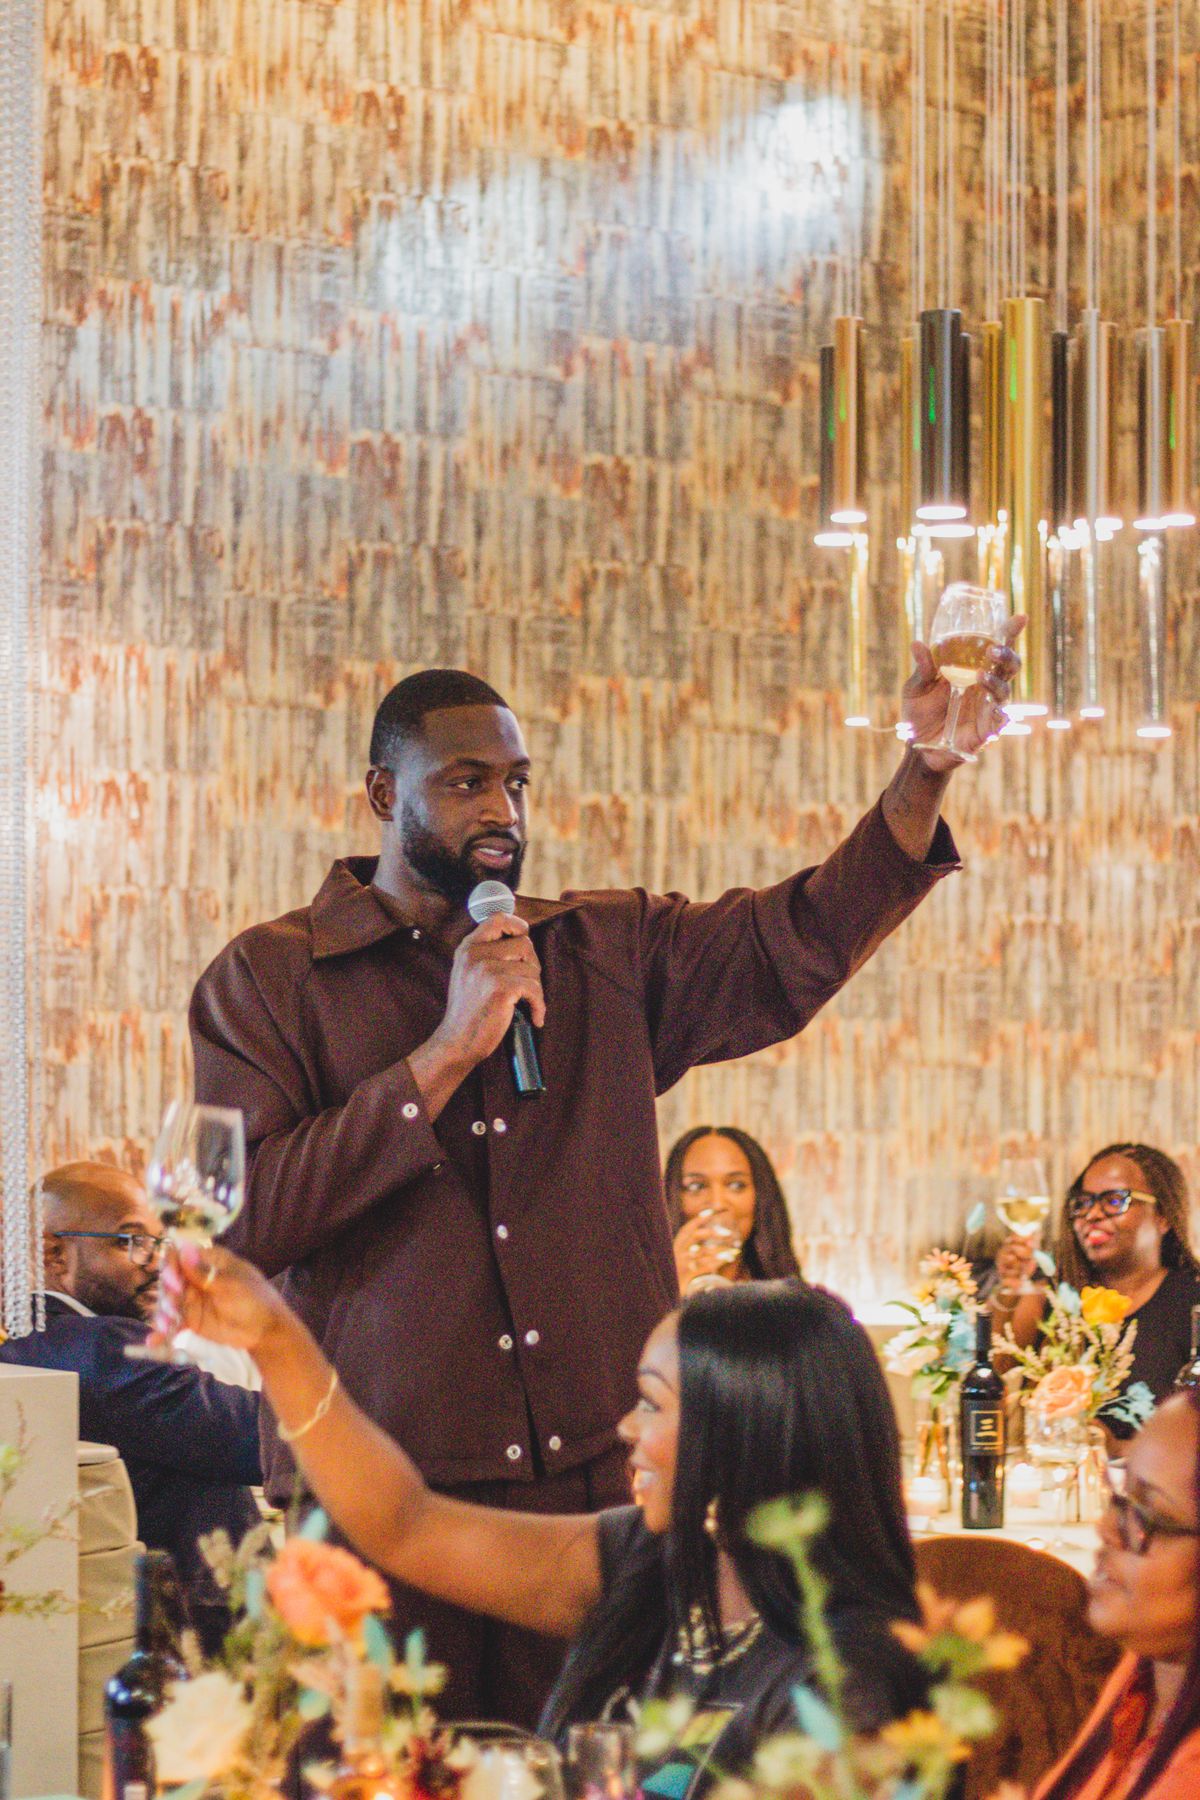 Man holds up a wine glass in a toast in one hand and speaks into a microphone.